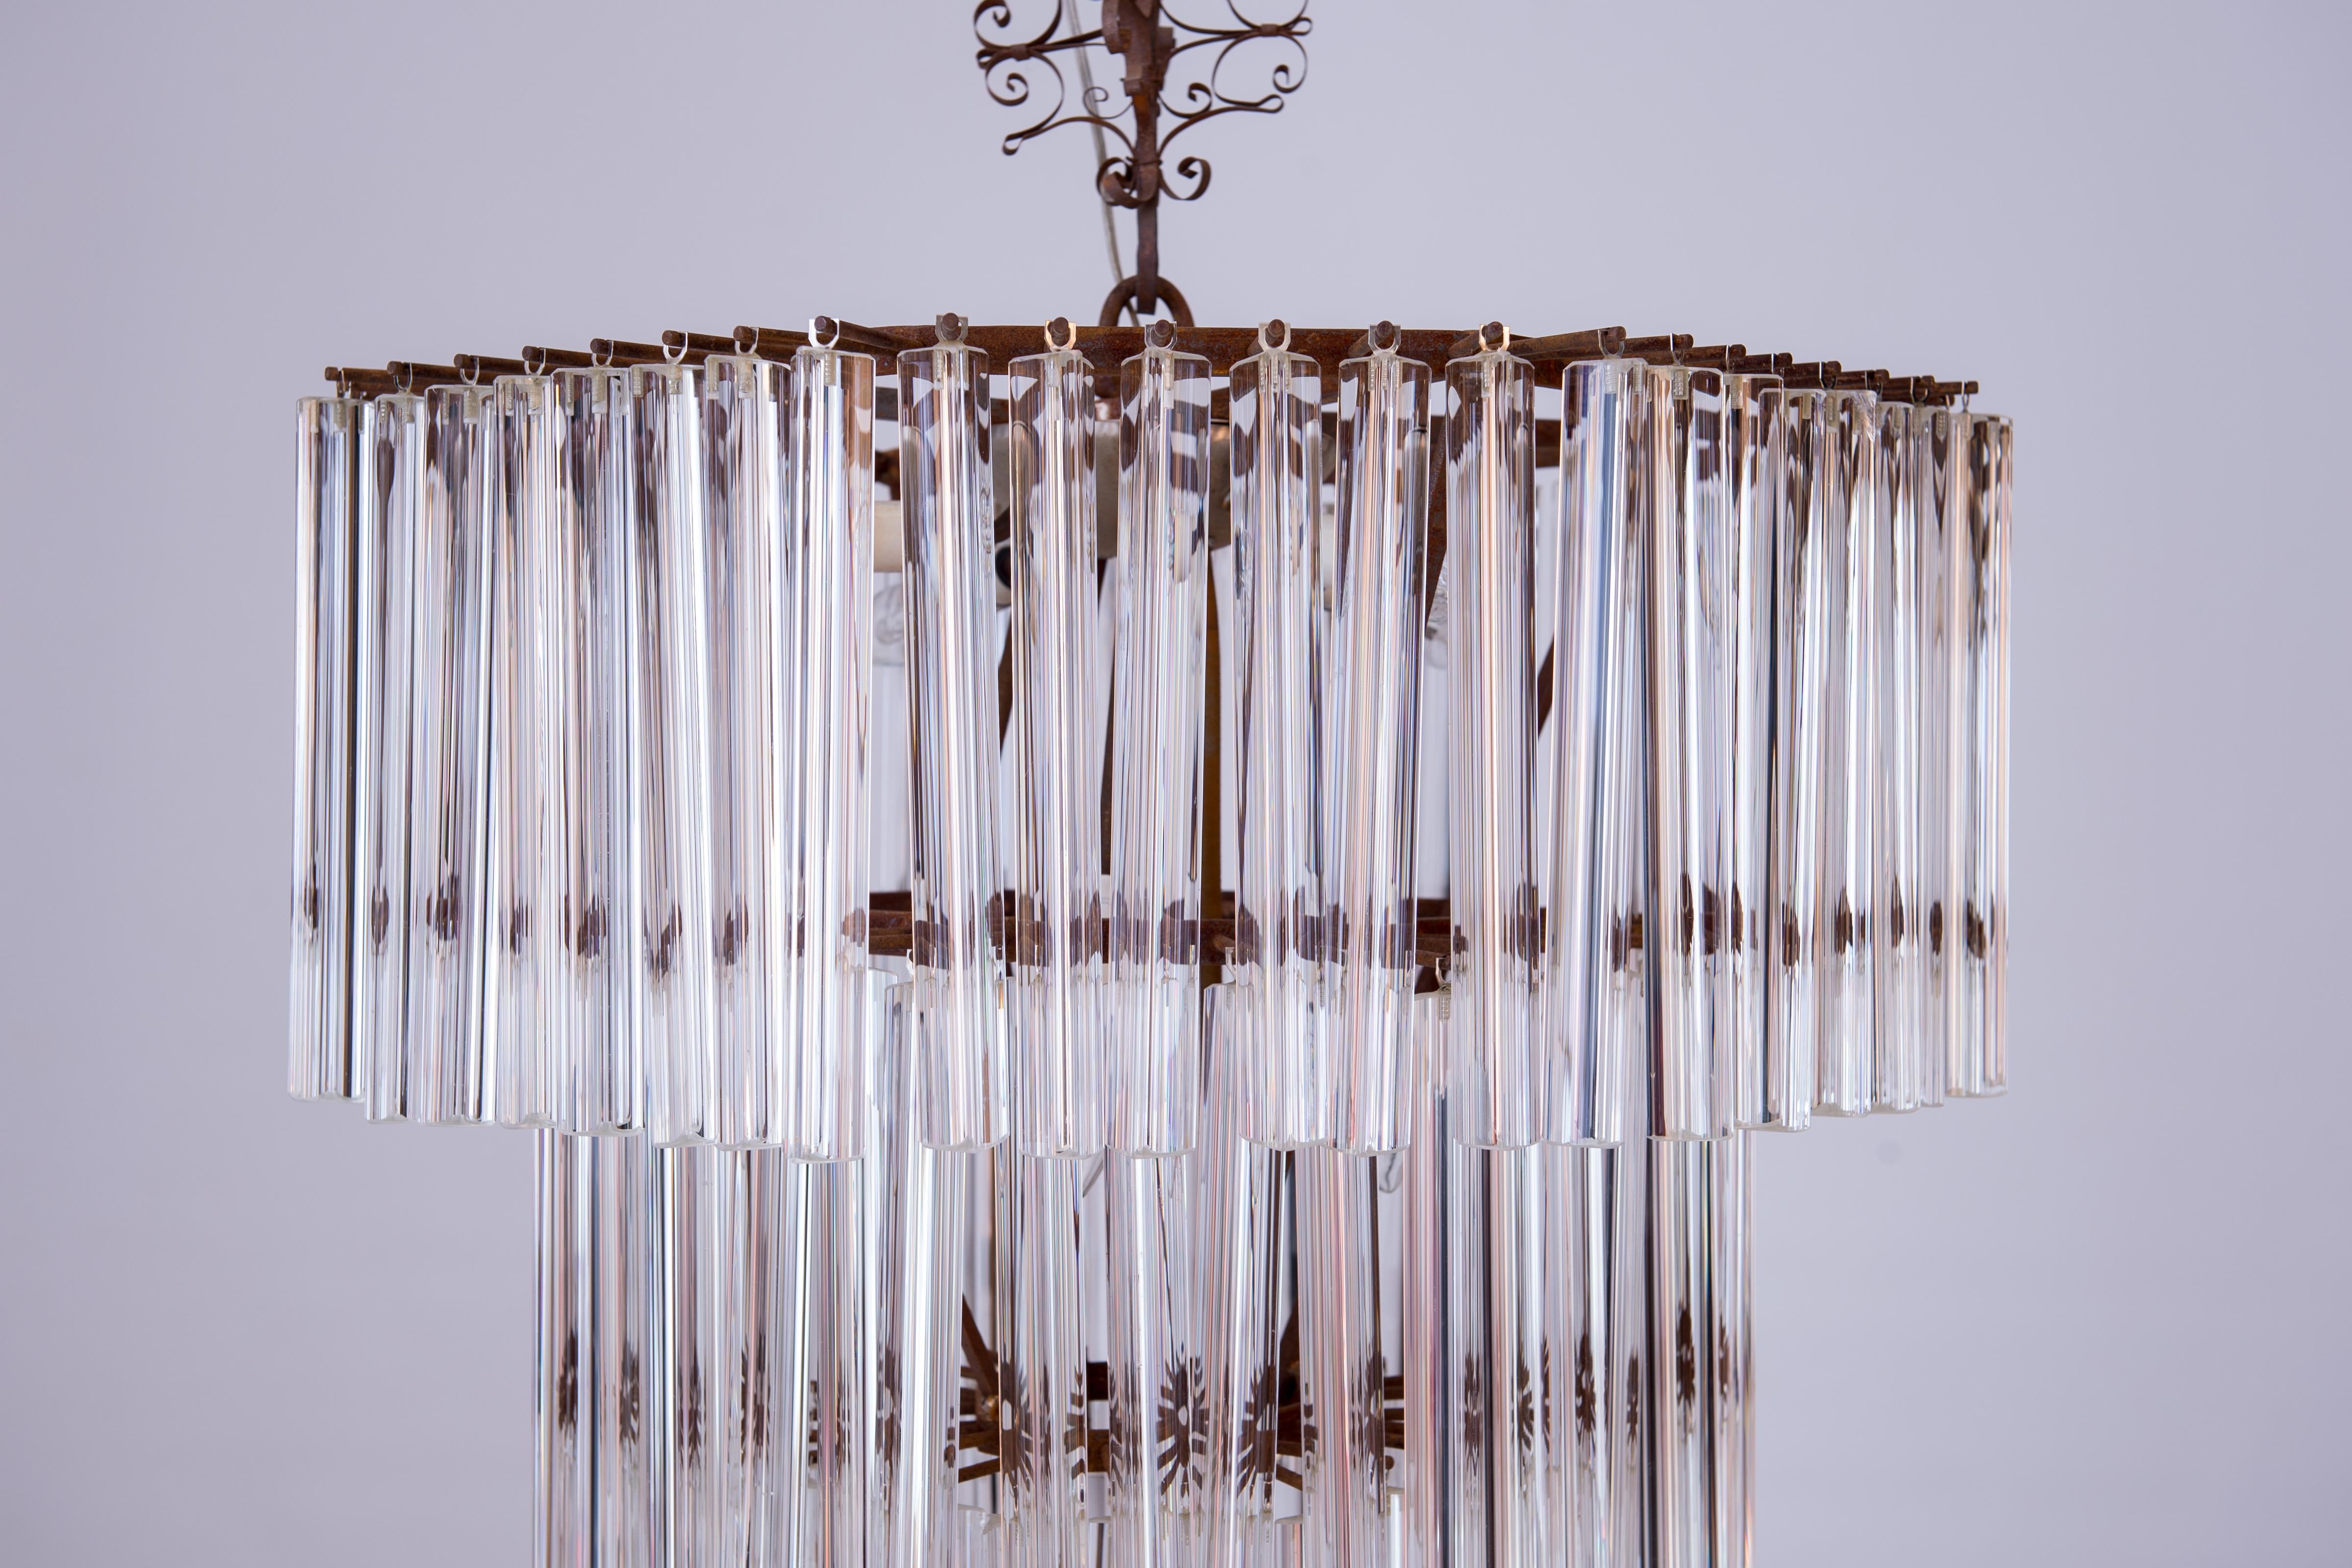 Hand-Crafted Vintage Trihedron Chandelier in Murano Glass Attributed to Venini, 1970s Italy